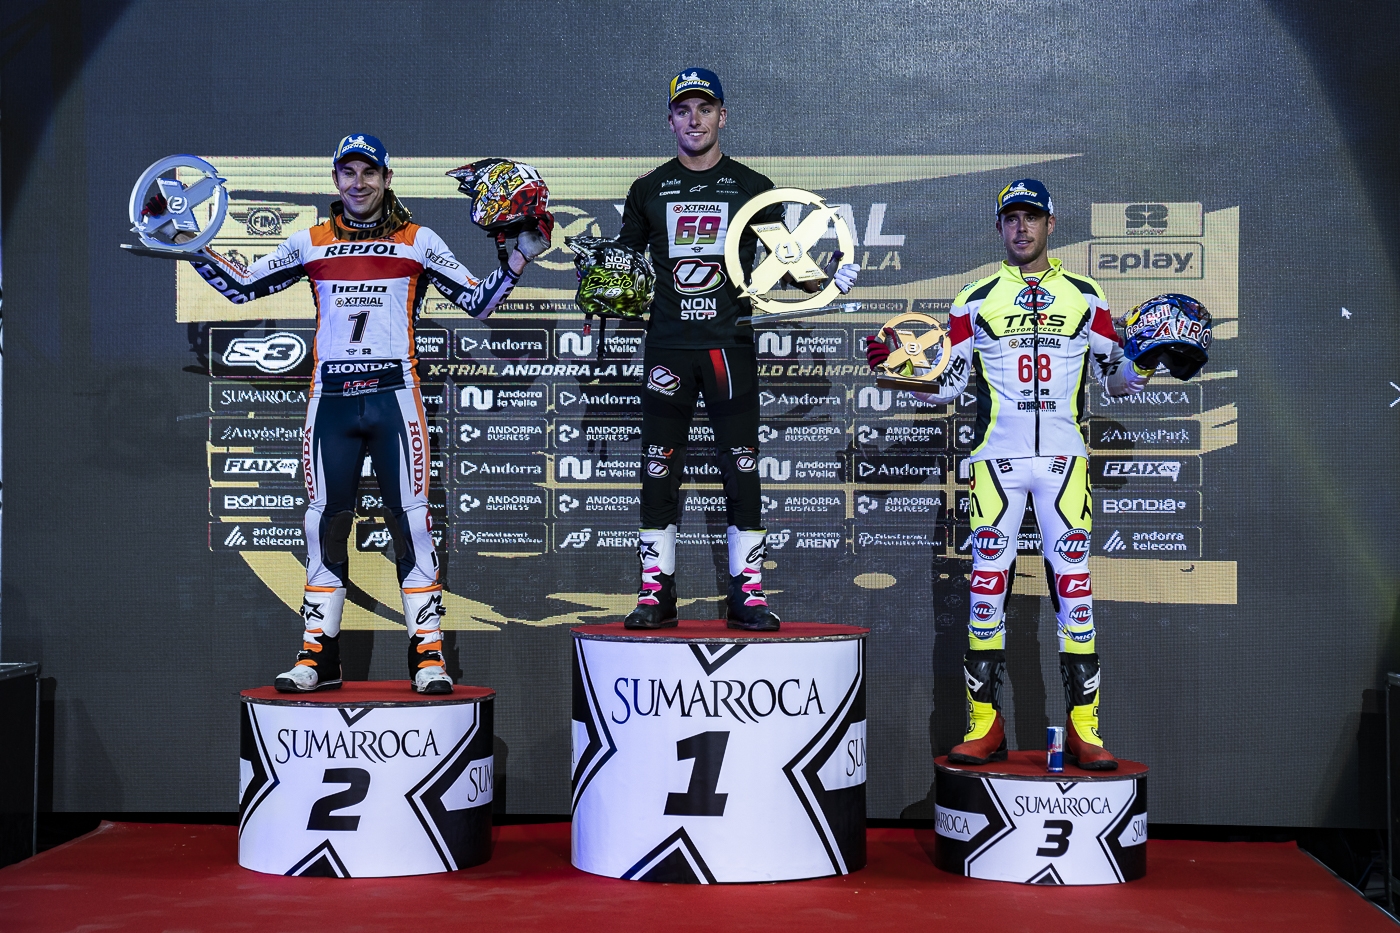 Jaime Busto ends the season with a win at X-Trial Andorra la Vella